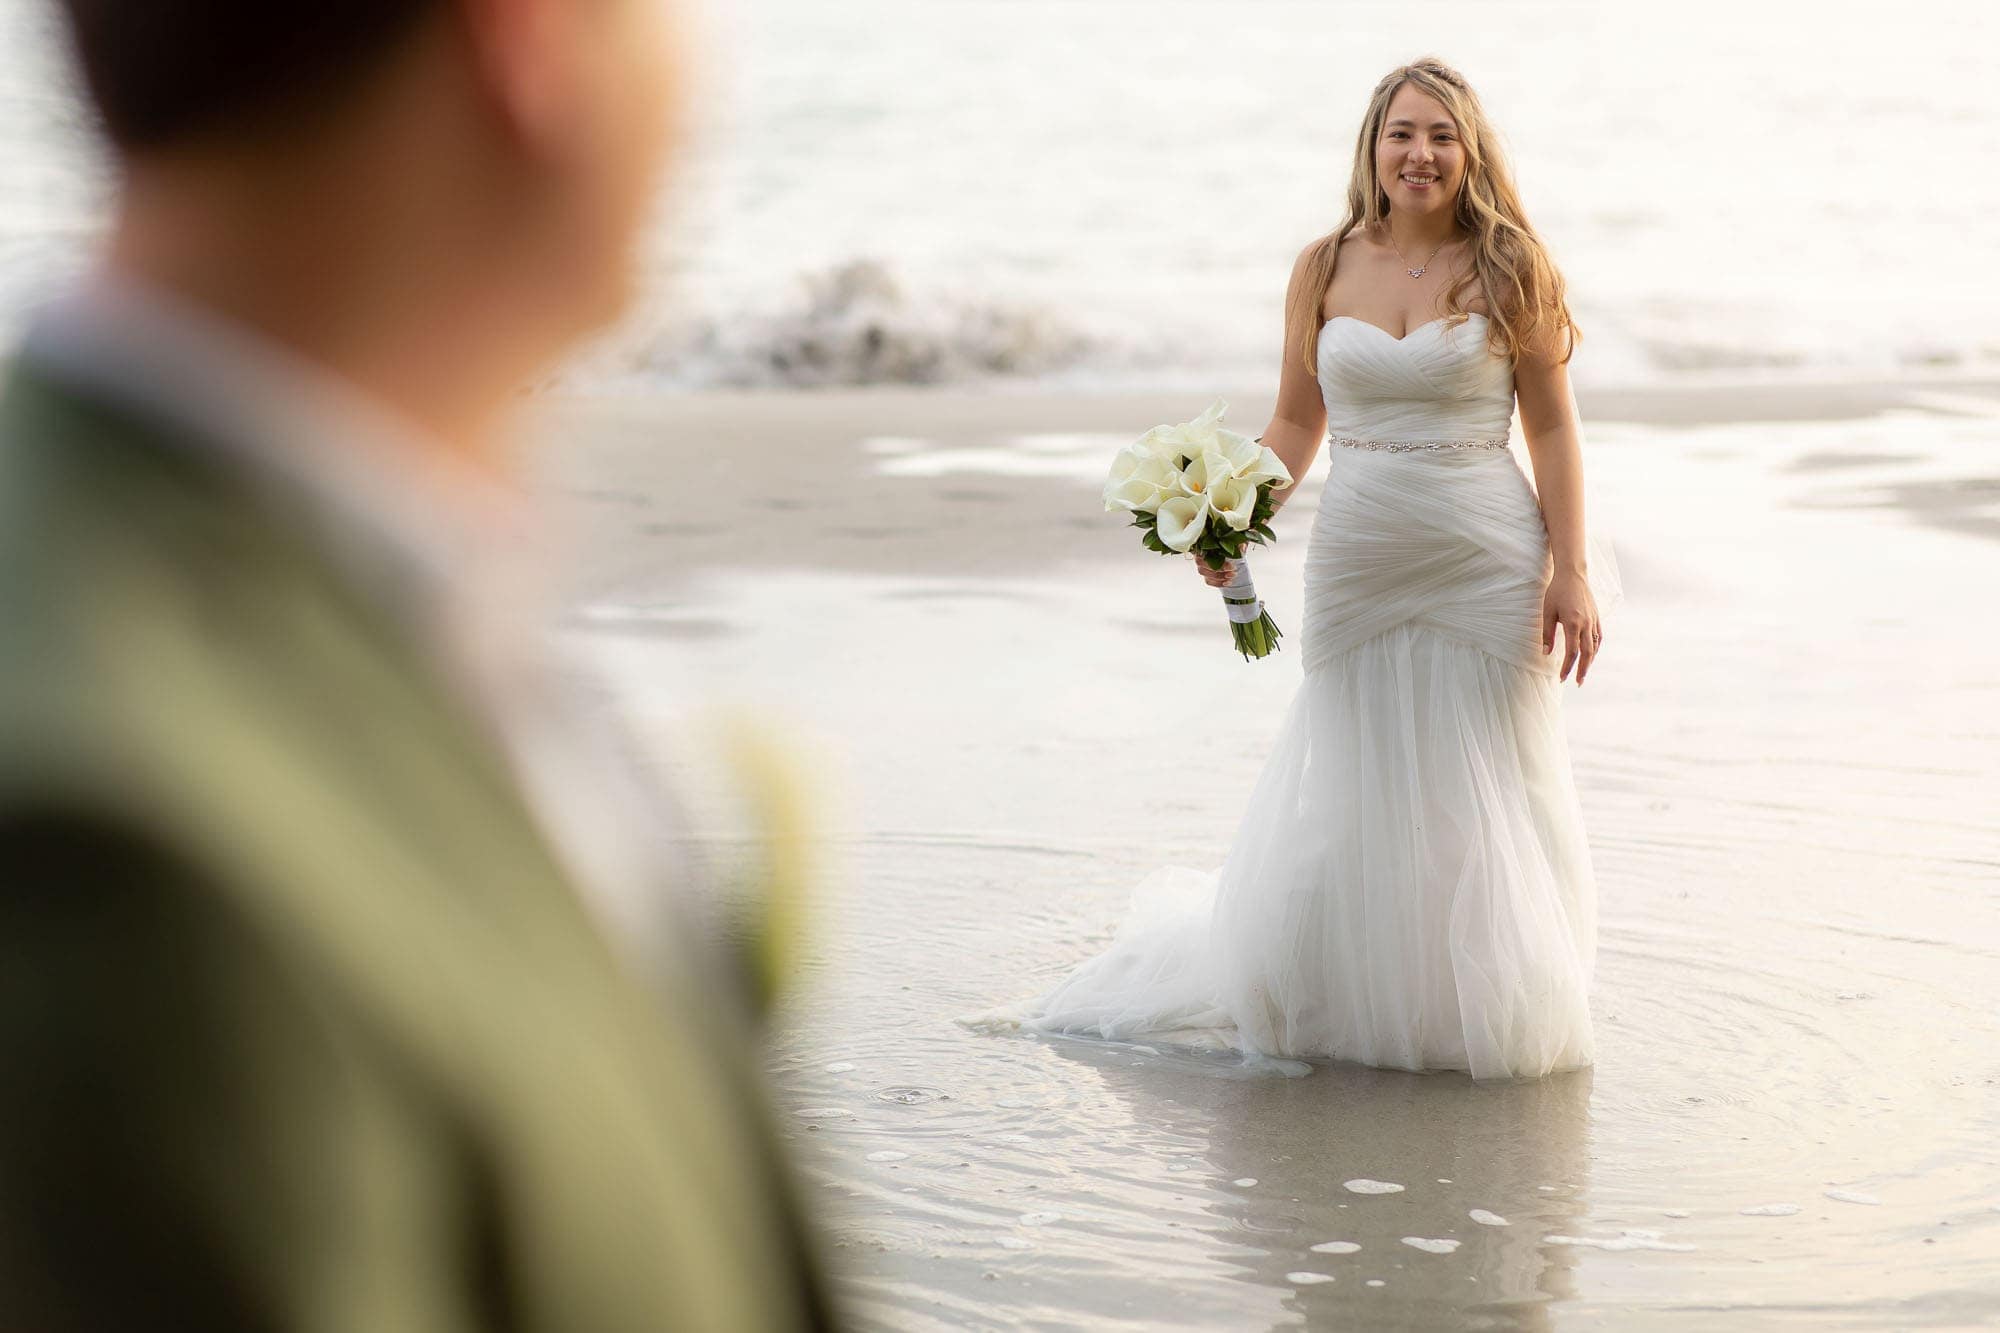 Bride on the beach with the groom